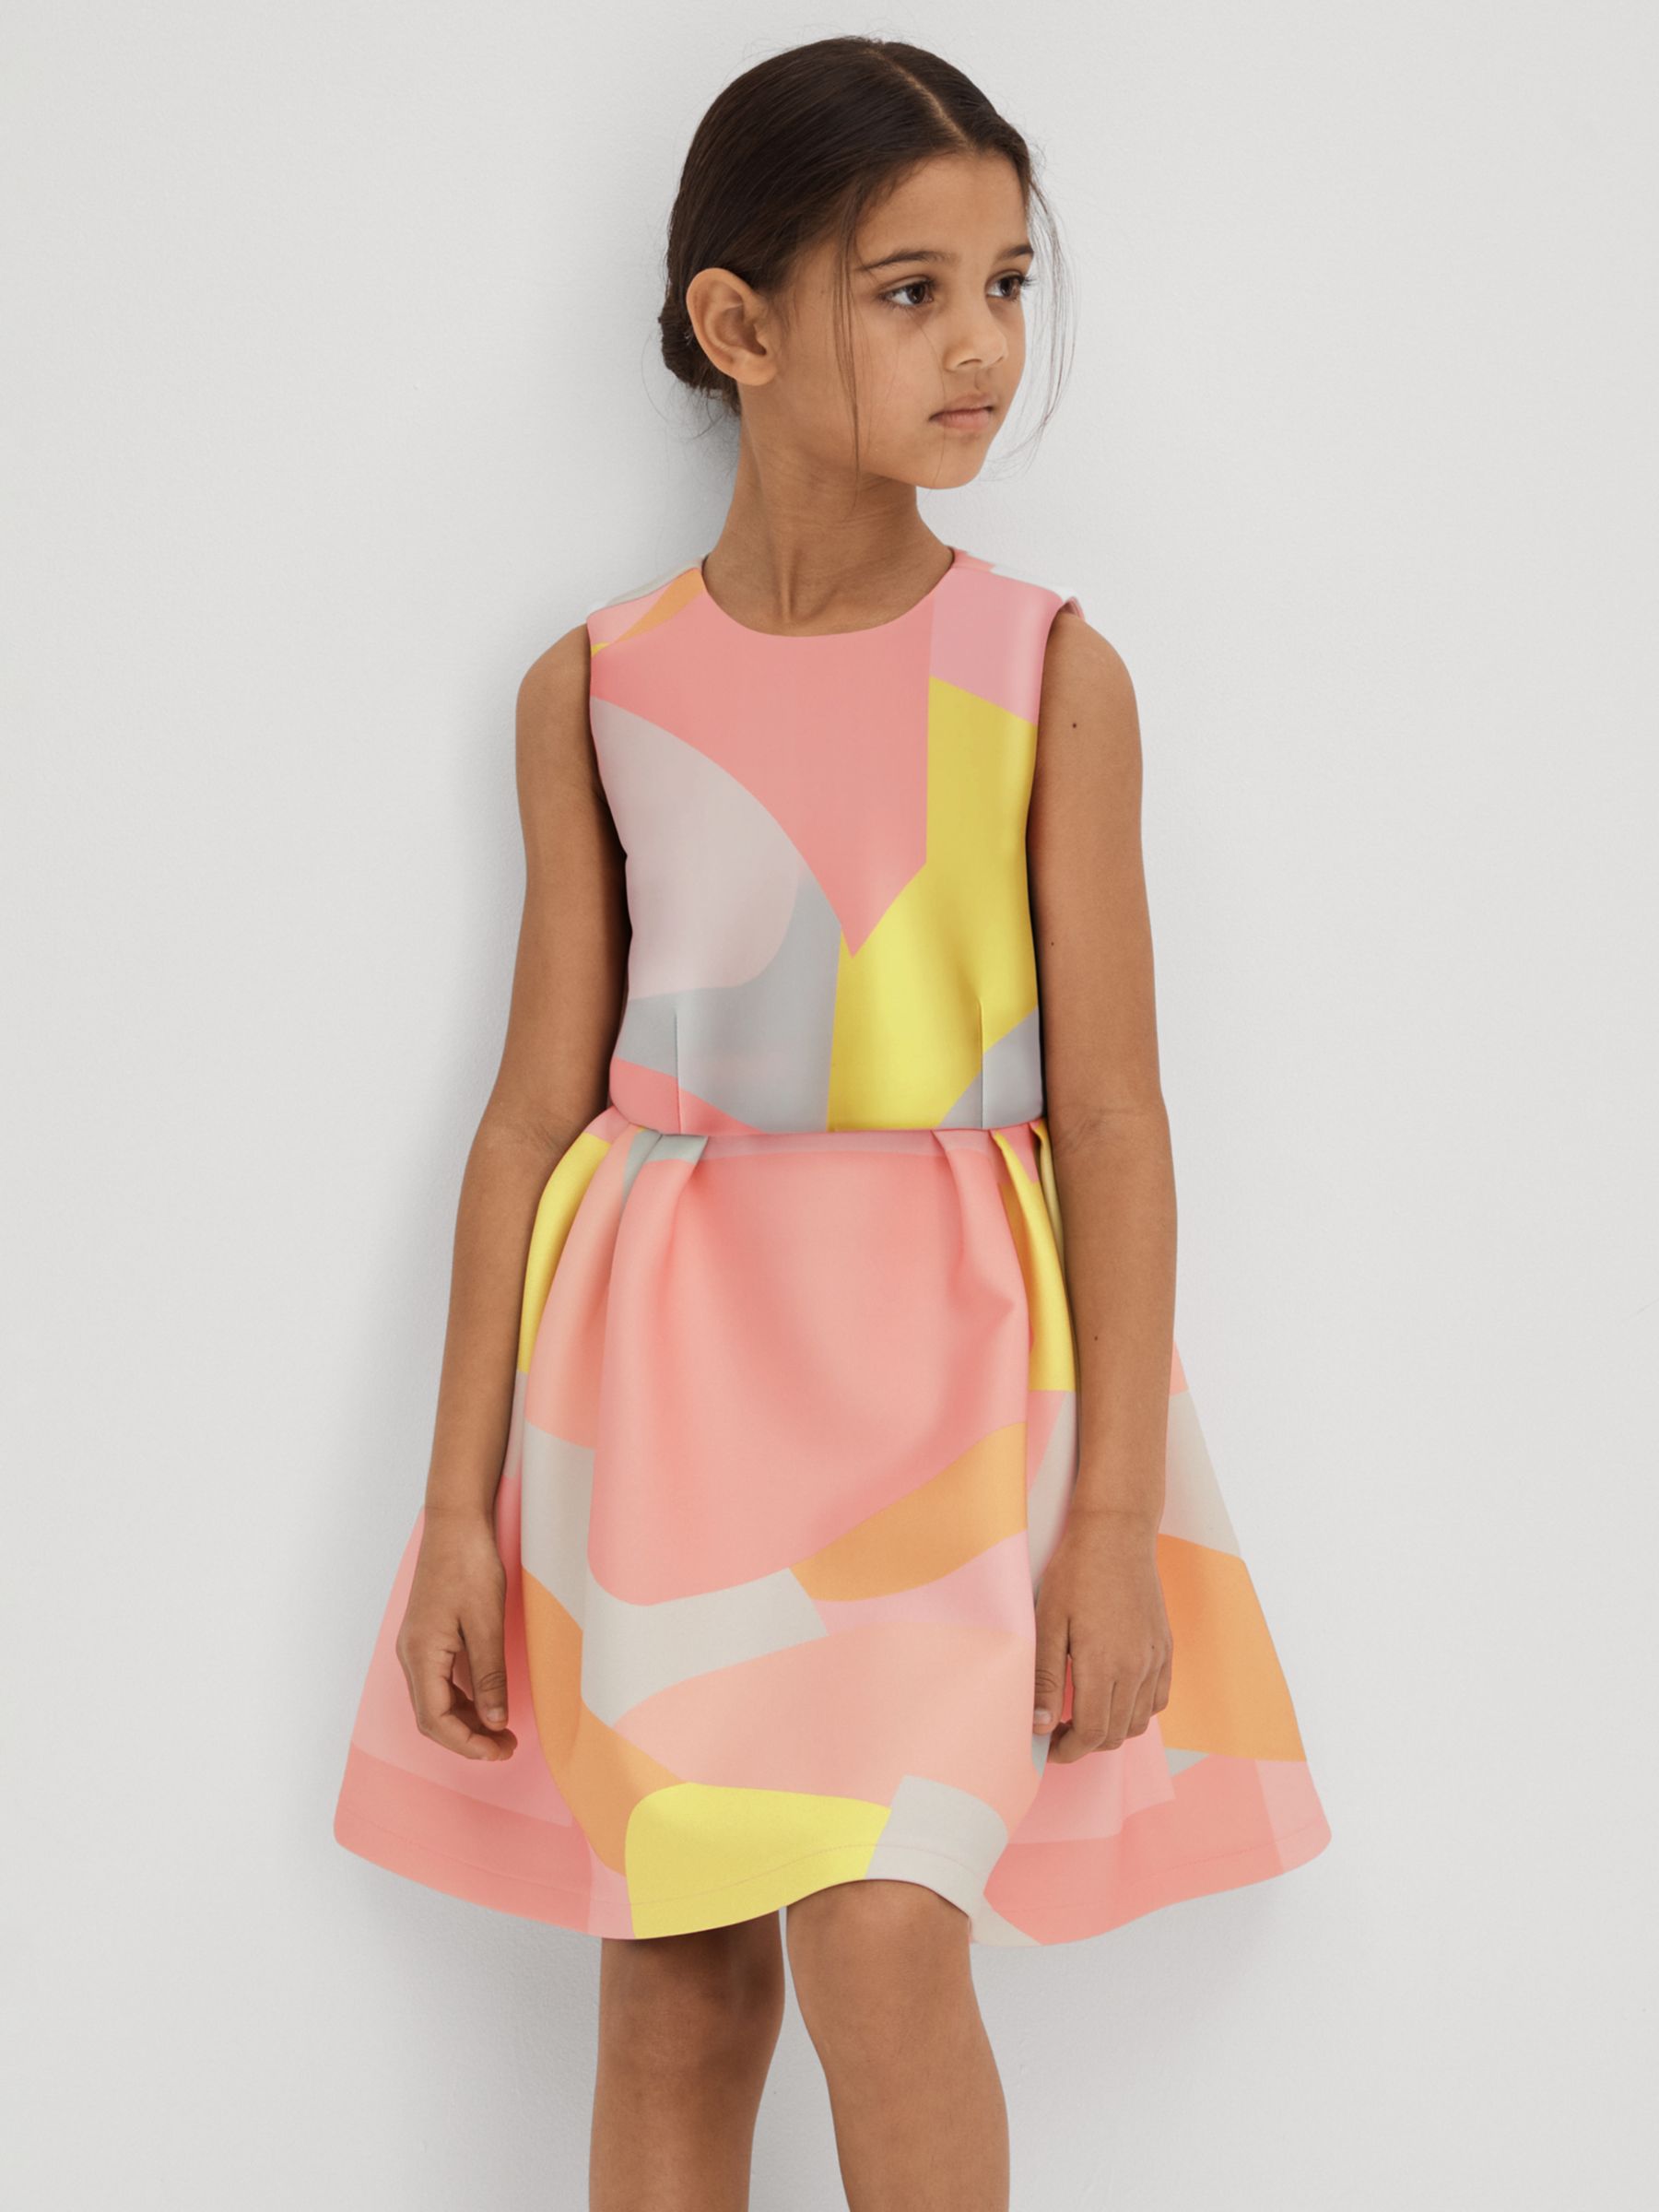 Reiss Kids' Trinny Abstract Print Pleated Scuba Dress, Multi, 4-5 years